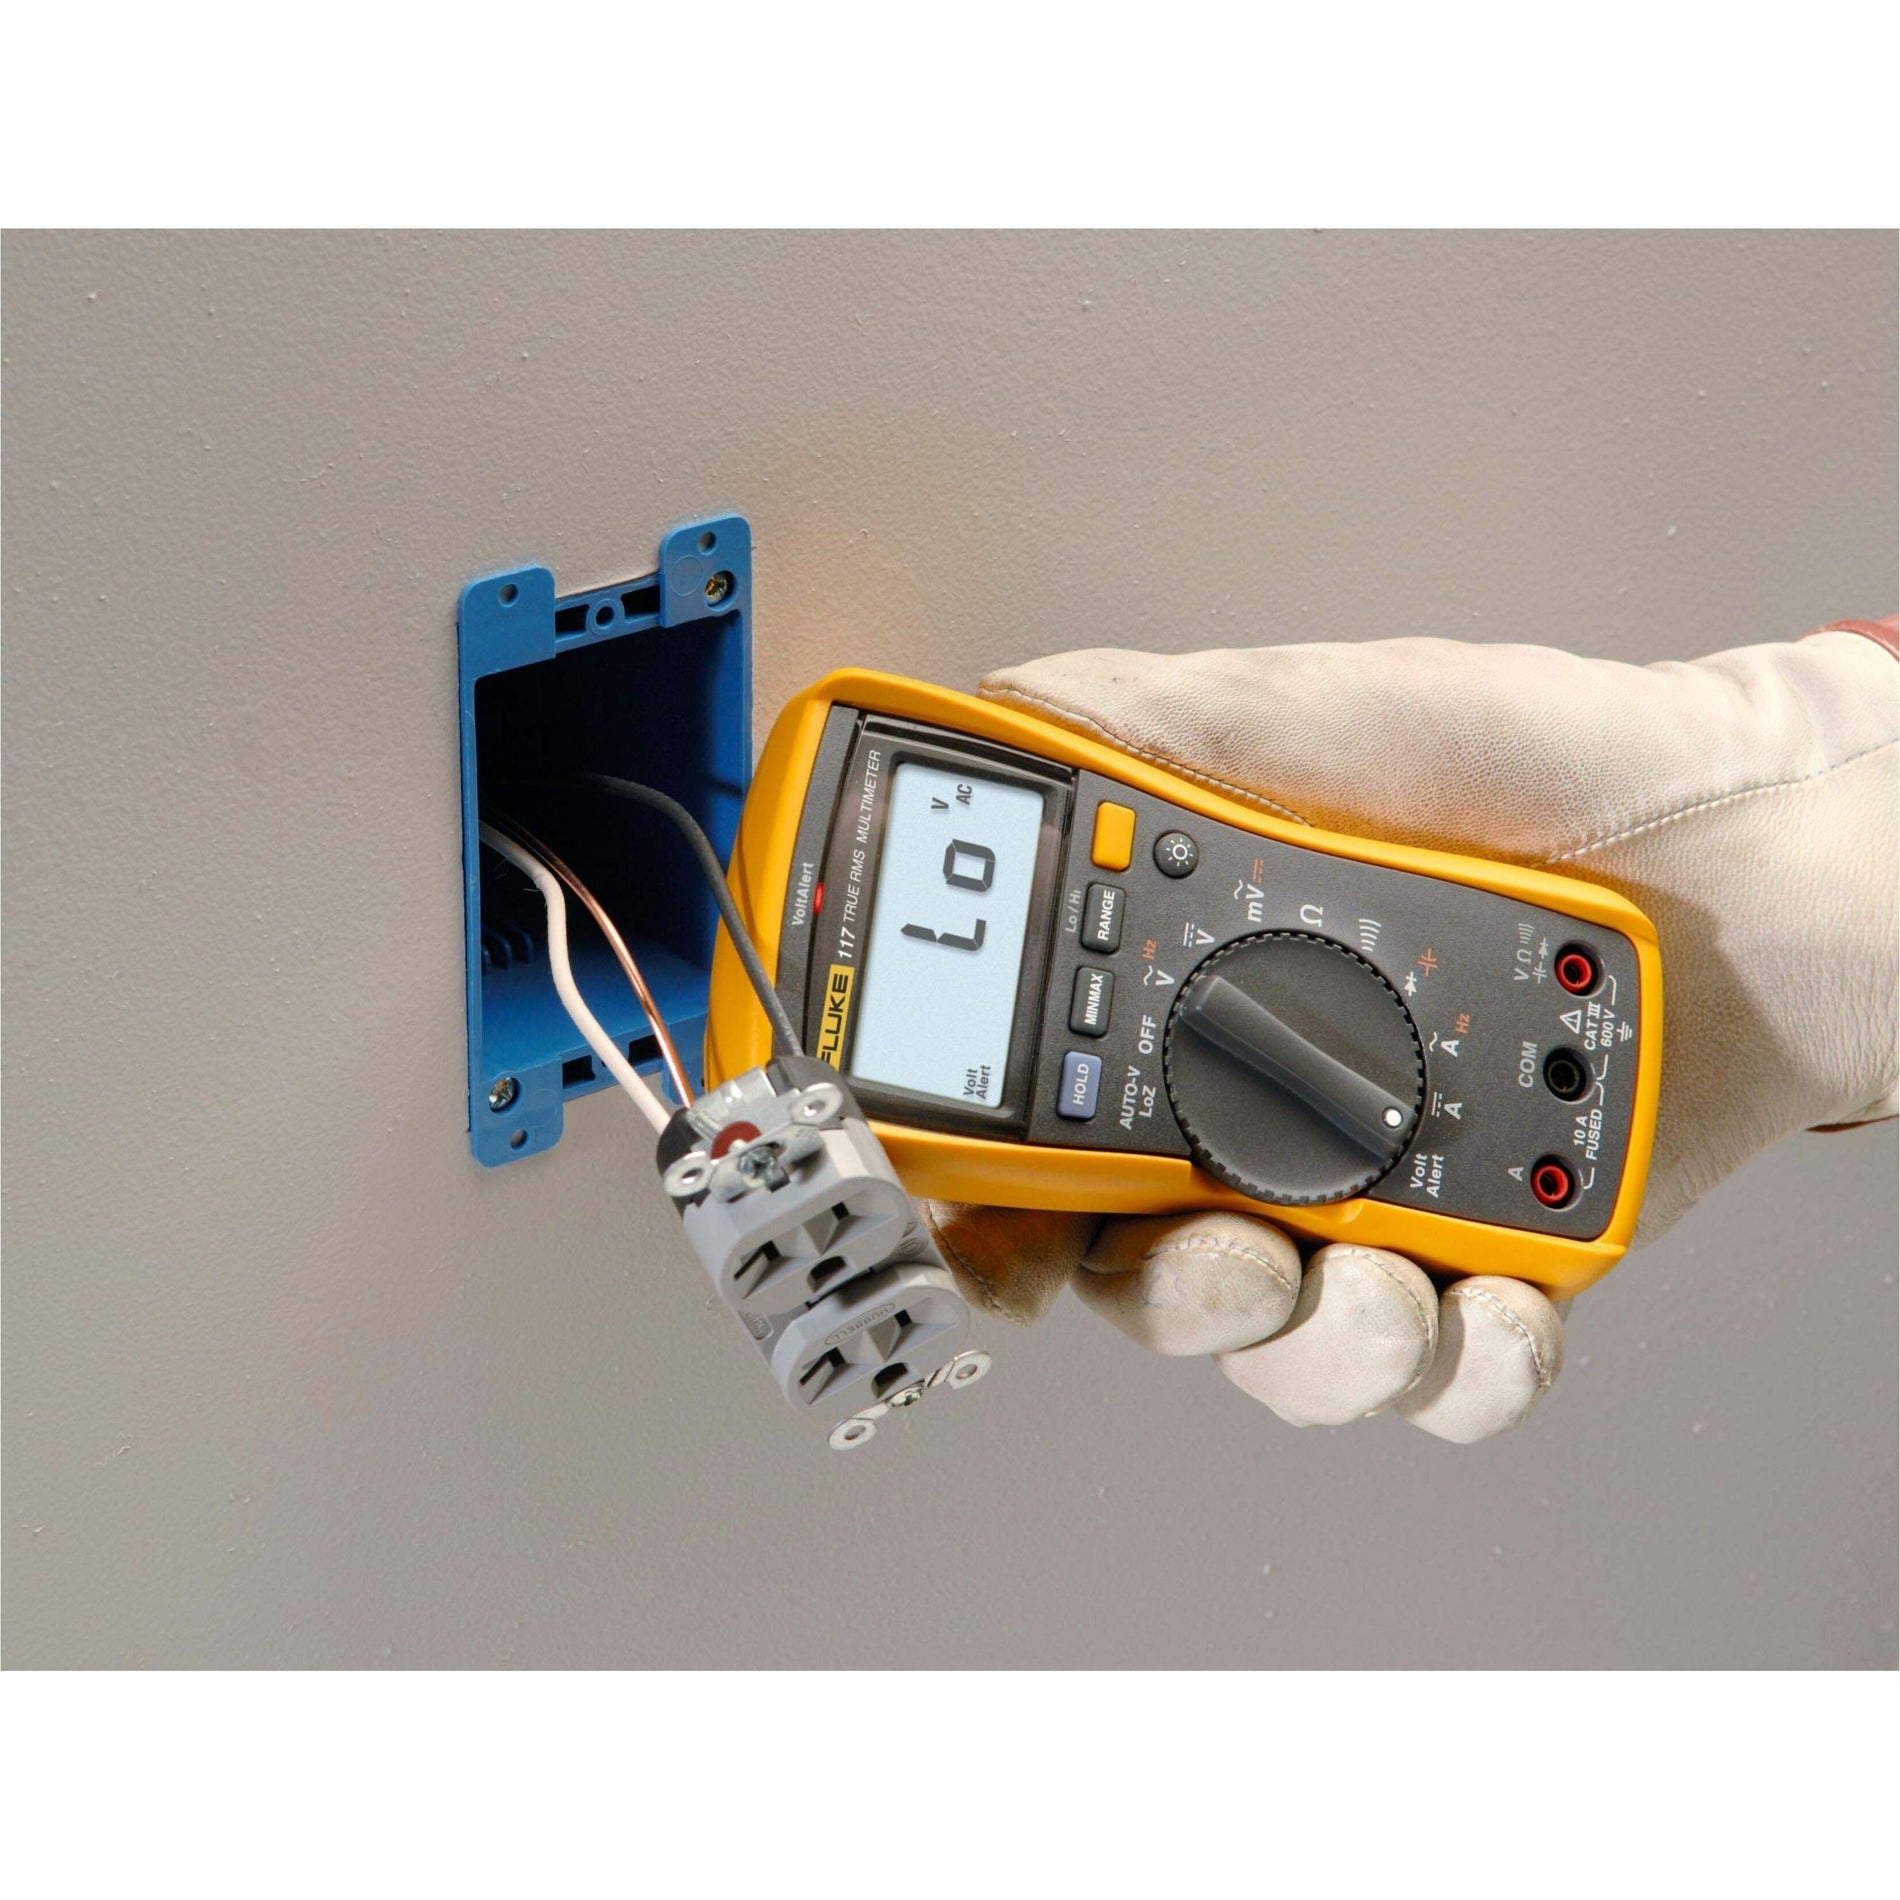 Fluke 117 Electricians Multimeter with Non-Contact voltage (FLUKE-117)